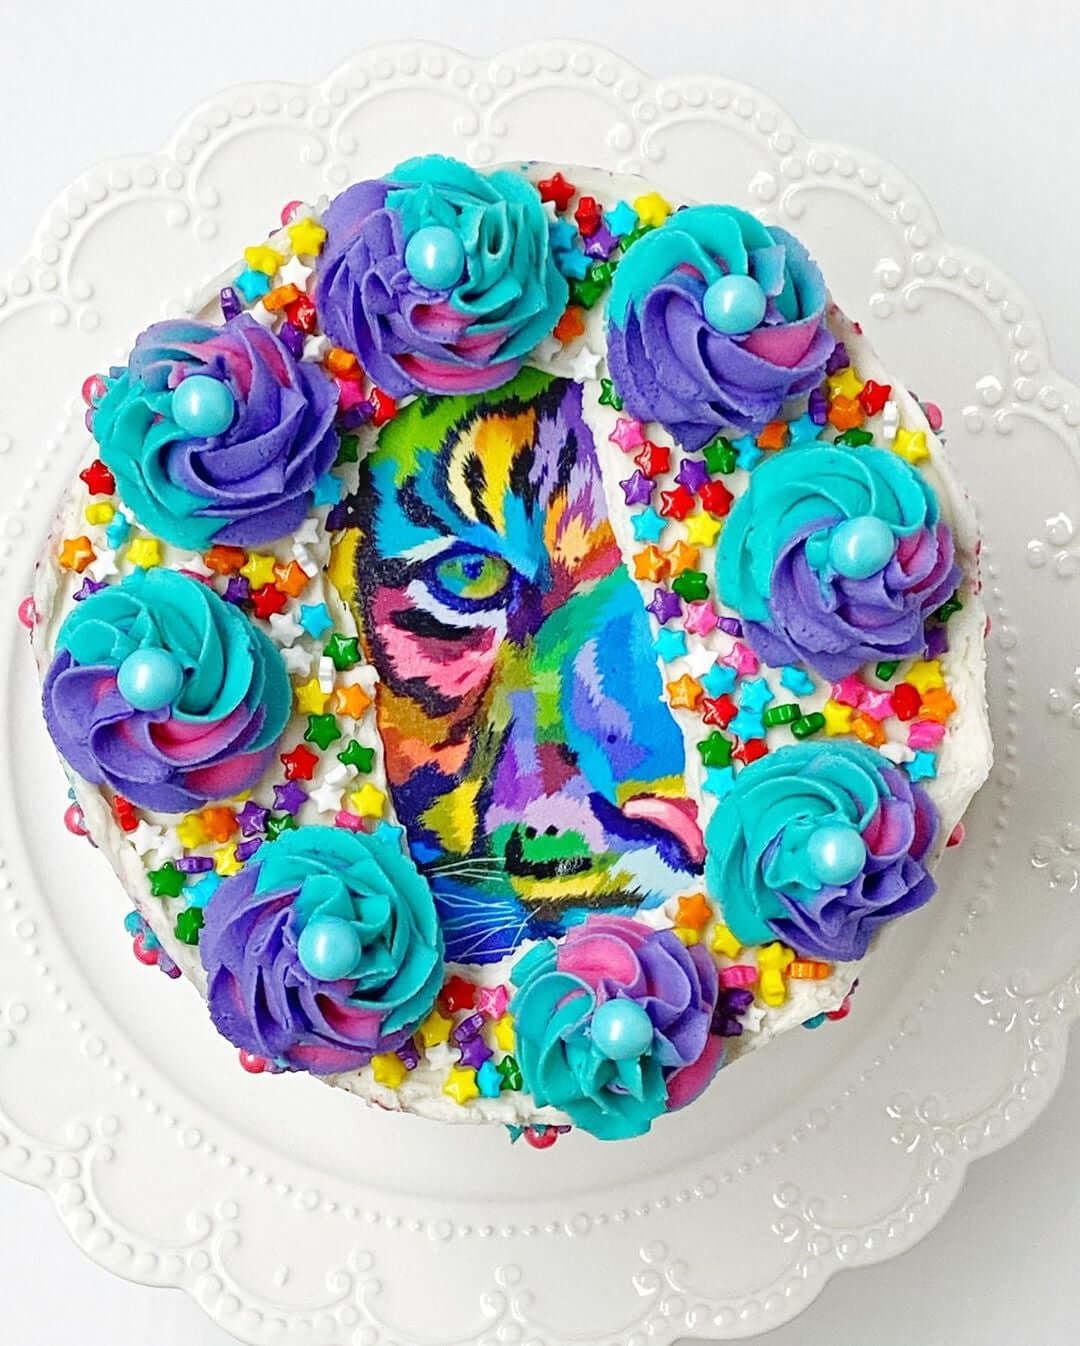 Colorful Tiger Face - Icing - ISA080.